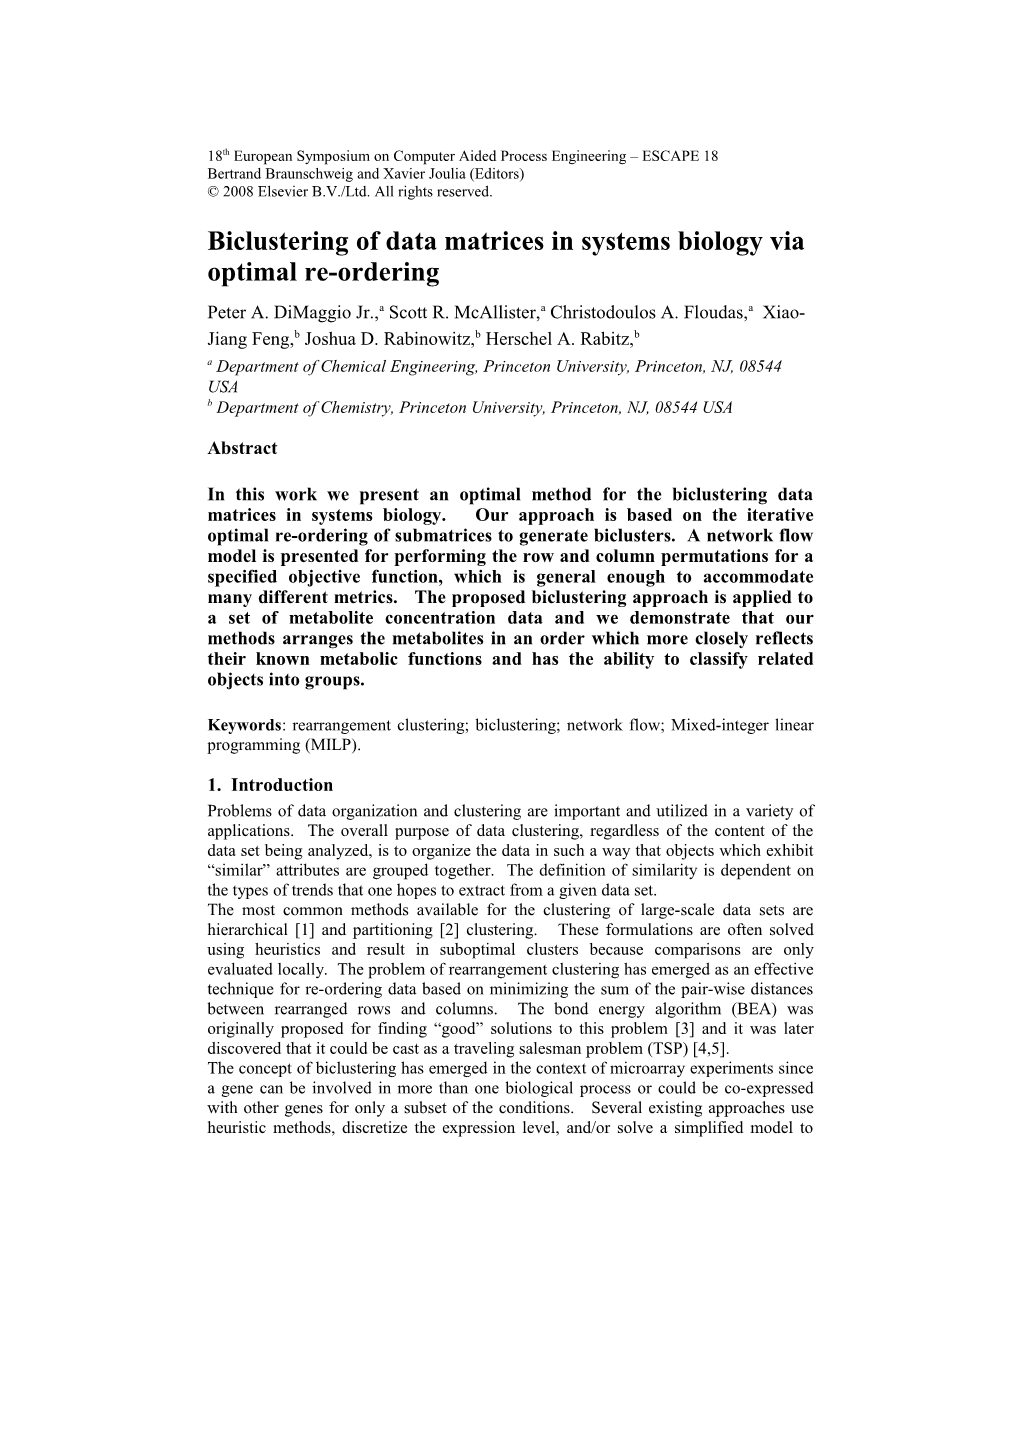 Biclustering of Data Matrices in Systems Biology Via Optimal Re-Ordering